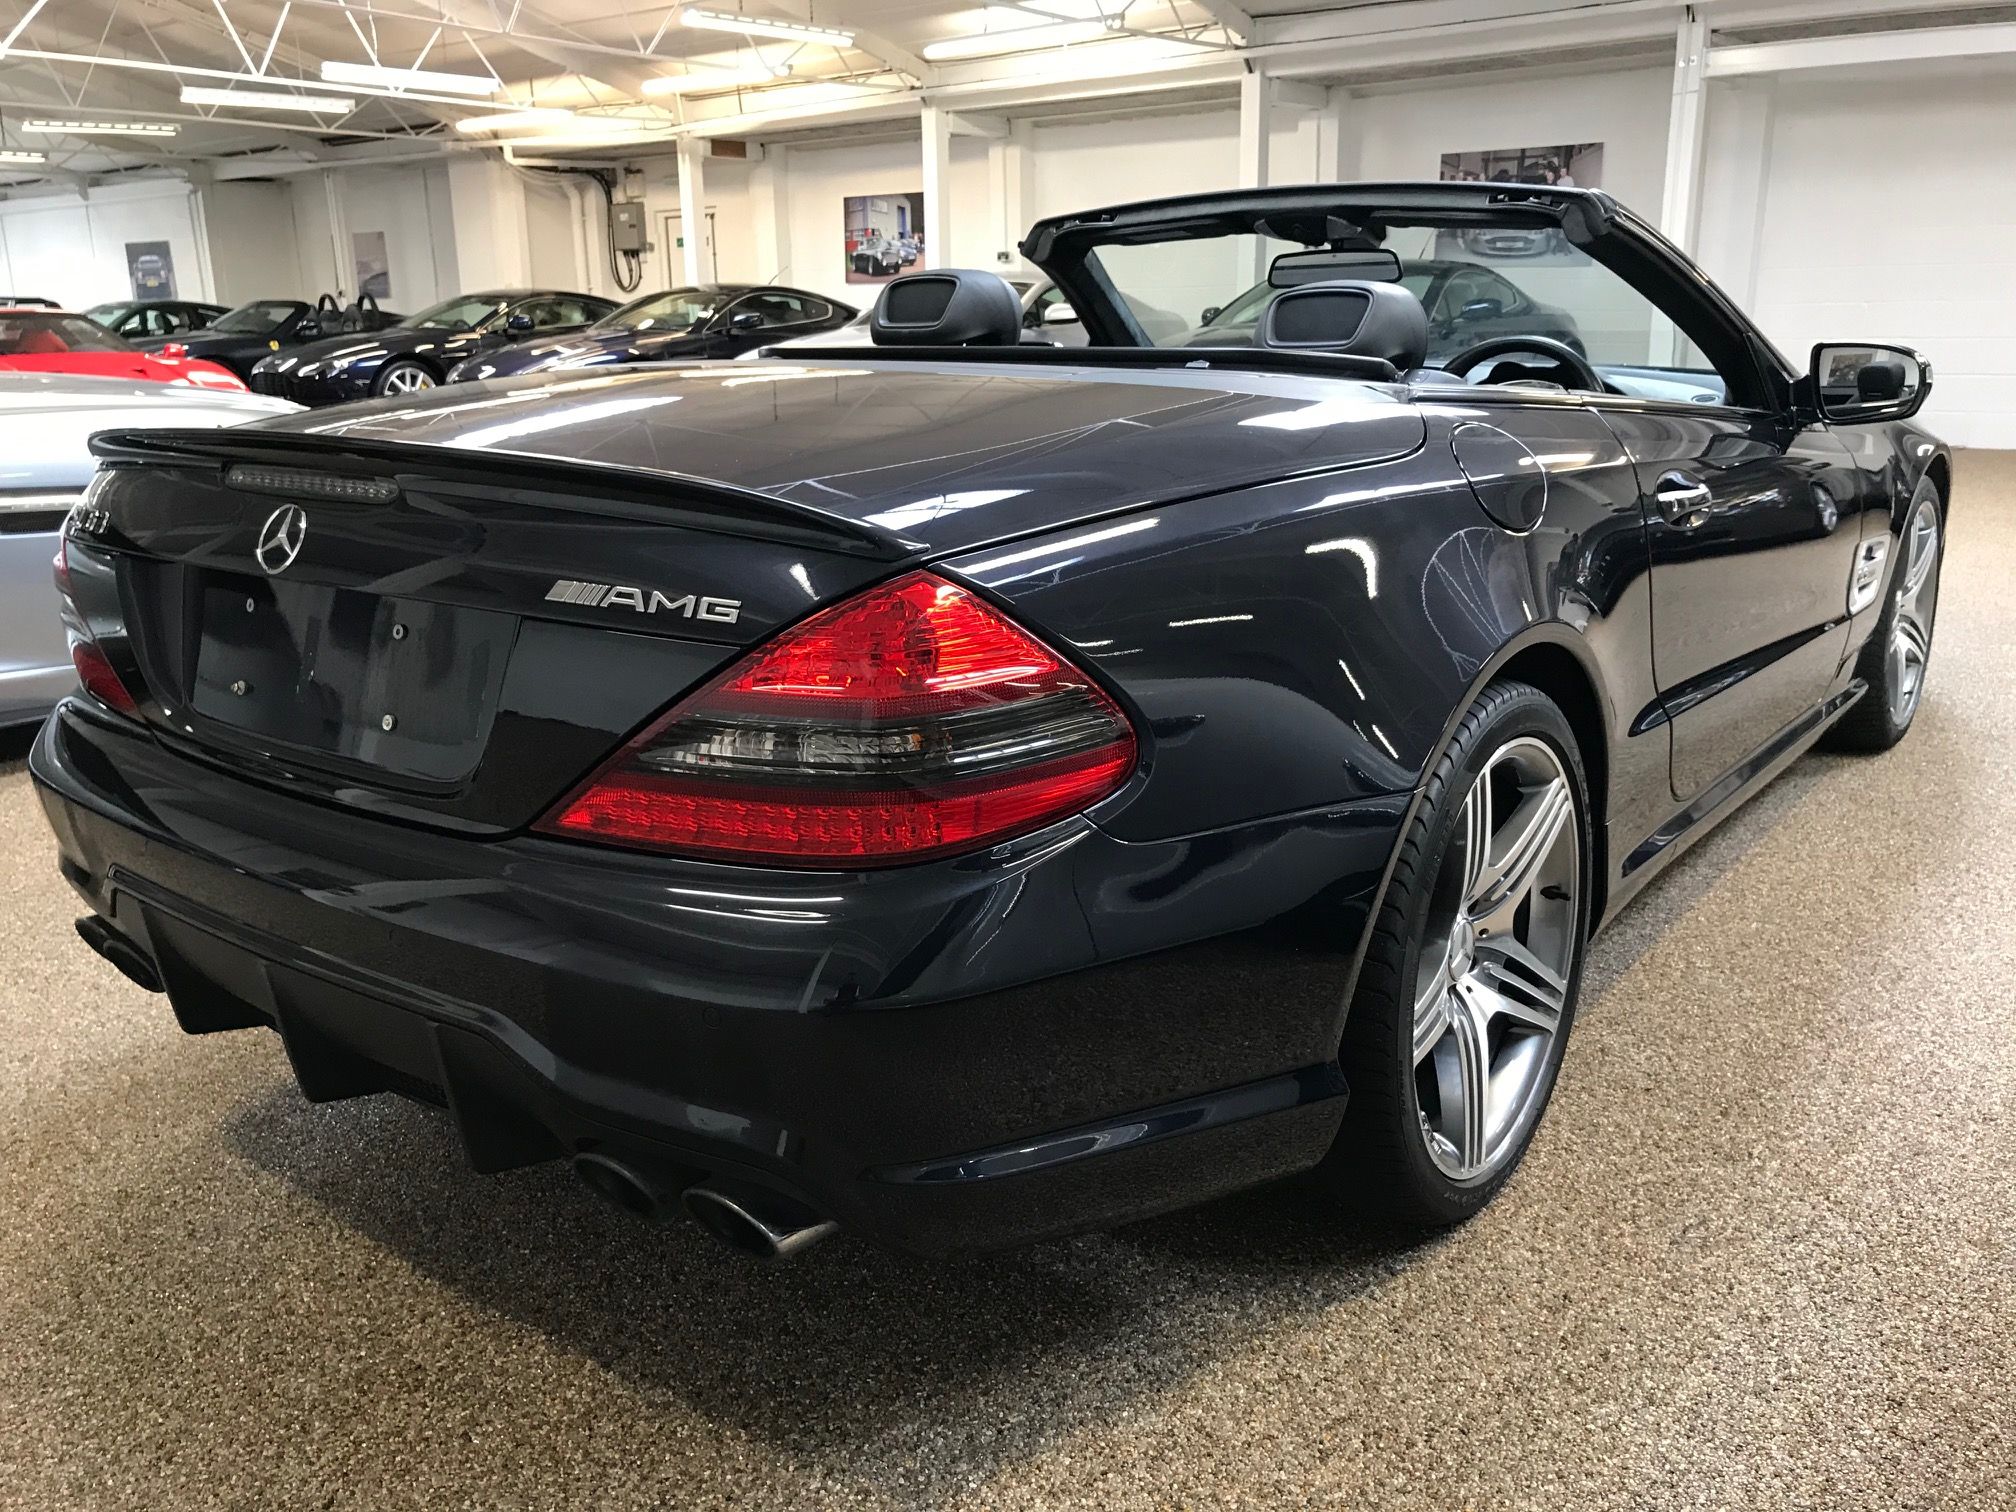 Used Mercedes SL63 For Sale